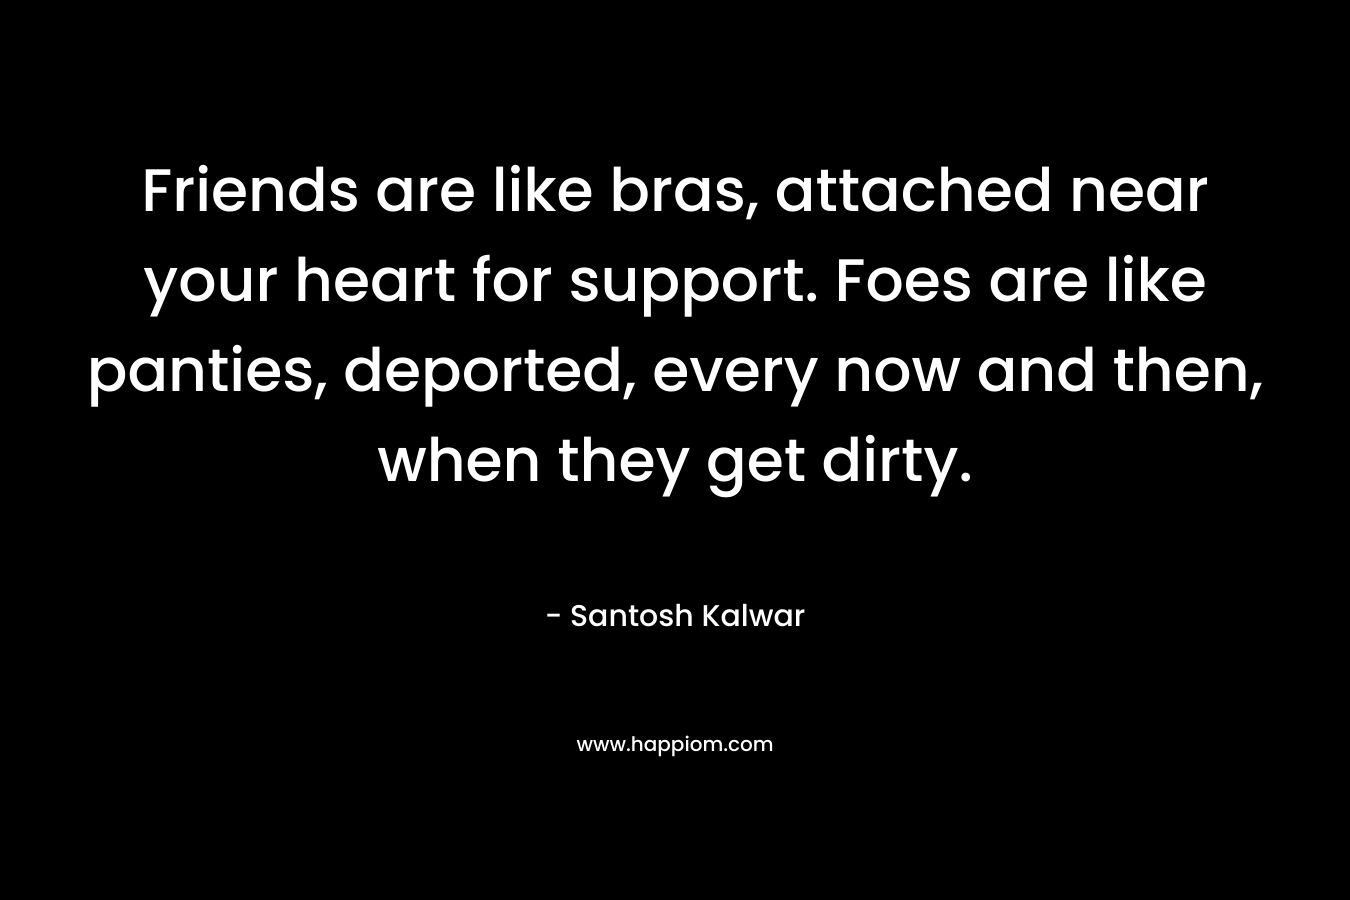 Friends are like bras, attached near your heart for support. Foes are like panties, deported, every now and then, when they get dirty. – Santosh Kalwar